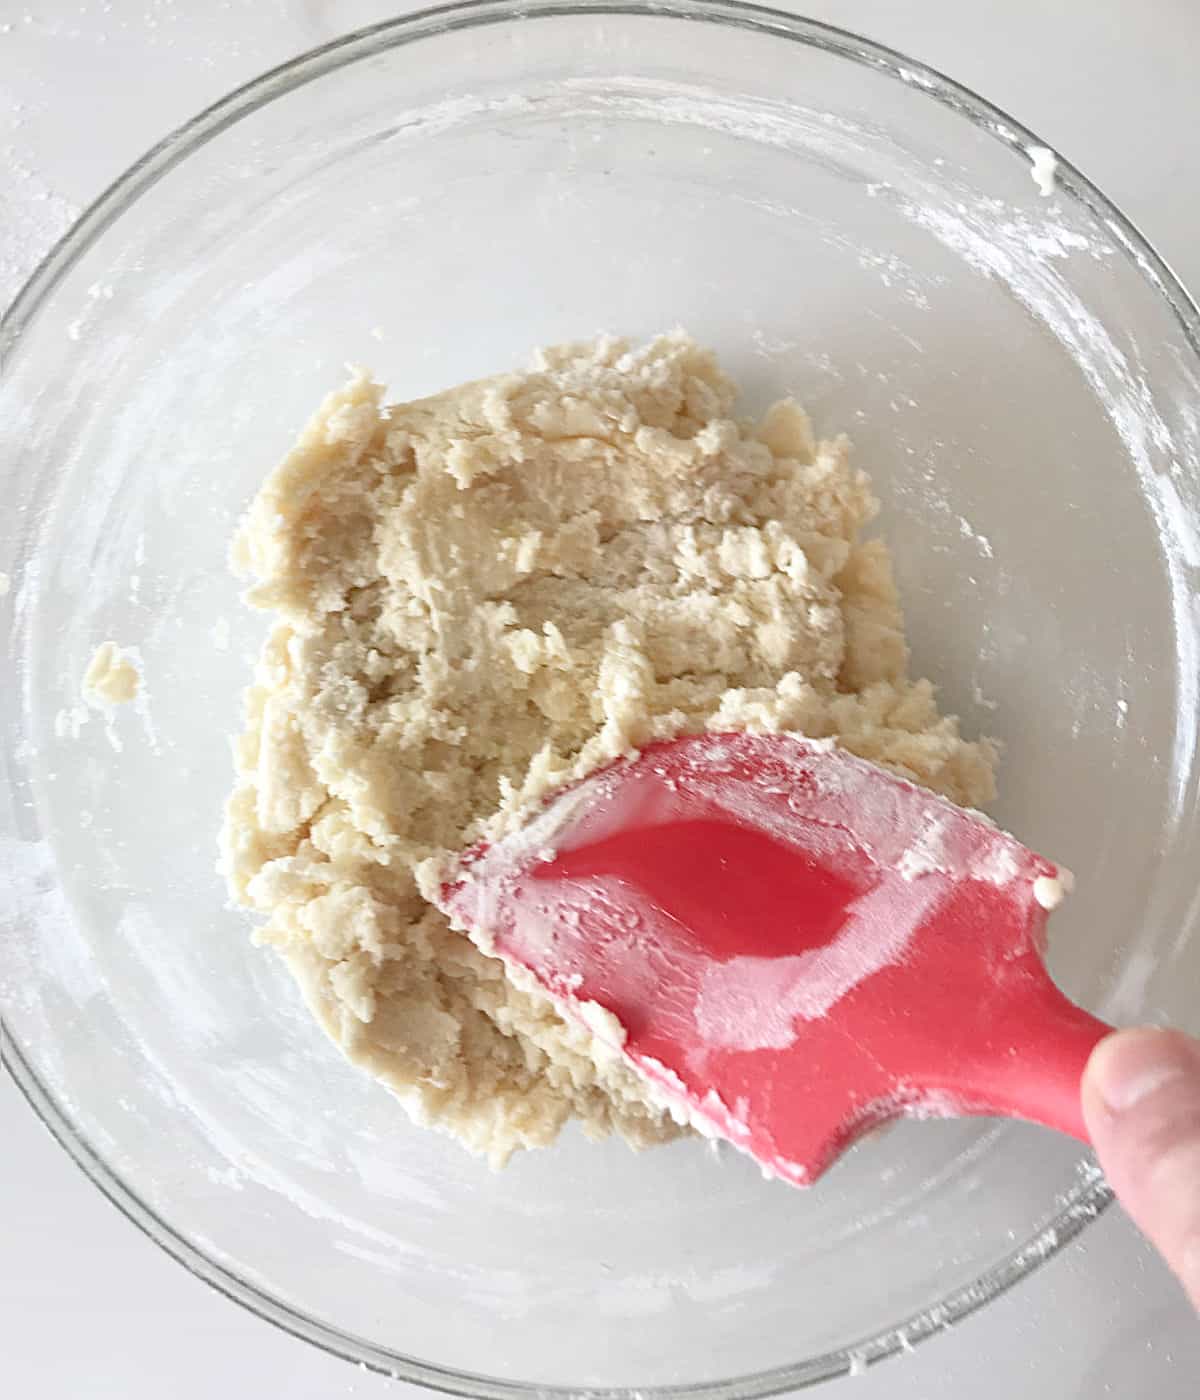 Red spatula mixing butter and sugar in a glass bowl on a white surface.